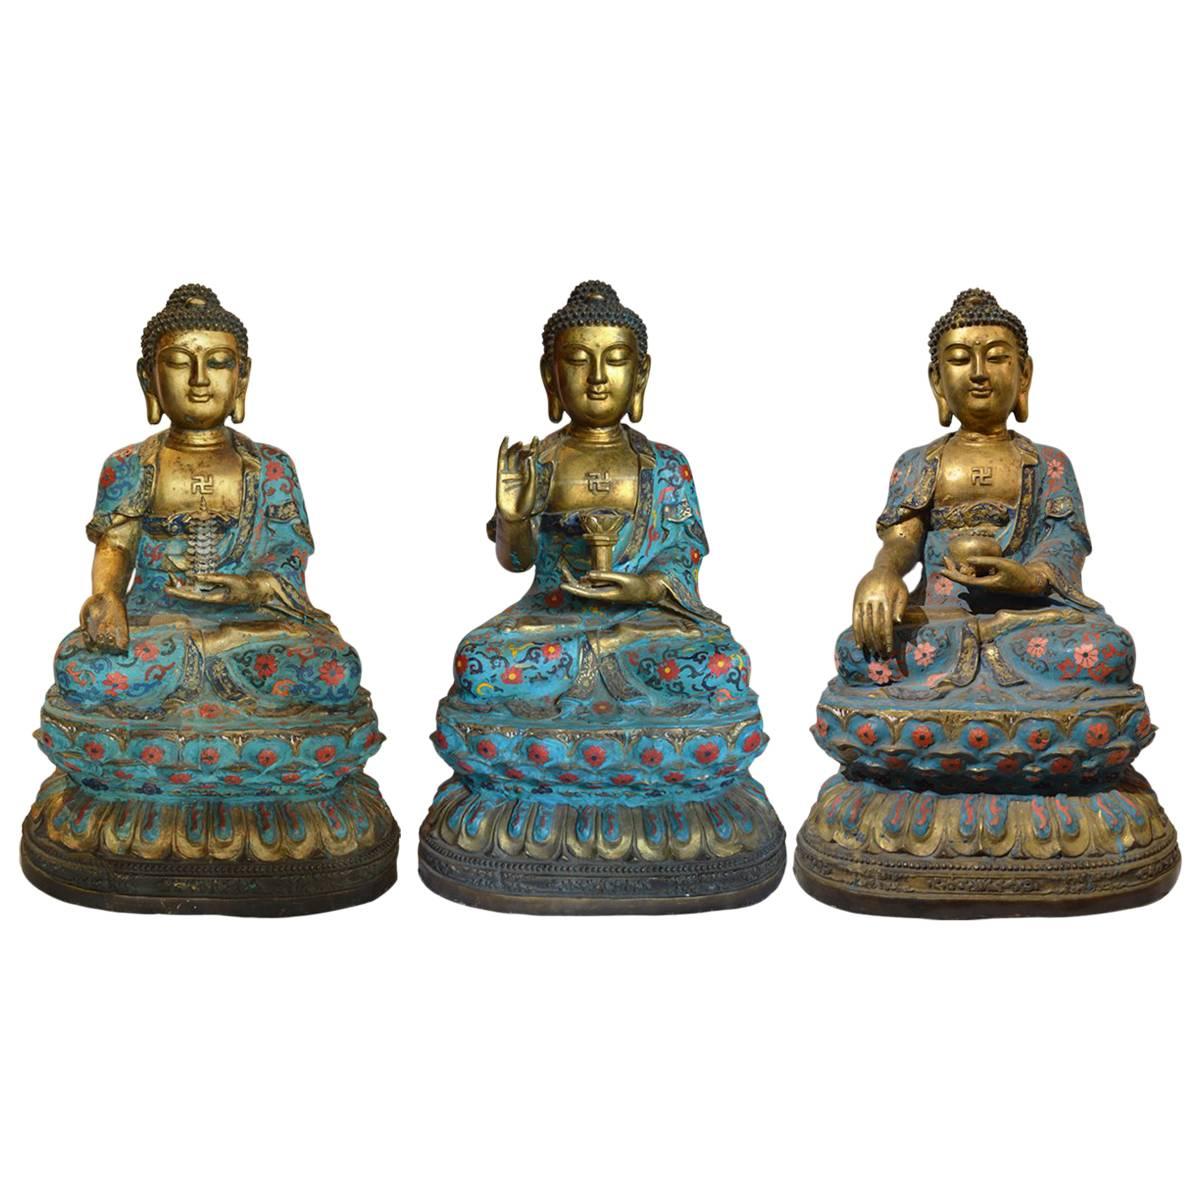 Three Large Chinese Gilt Bronze and Cloisonné Buddha’s Seated on Lotus Flower